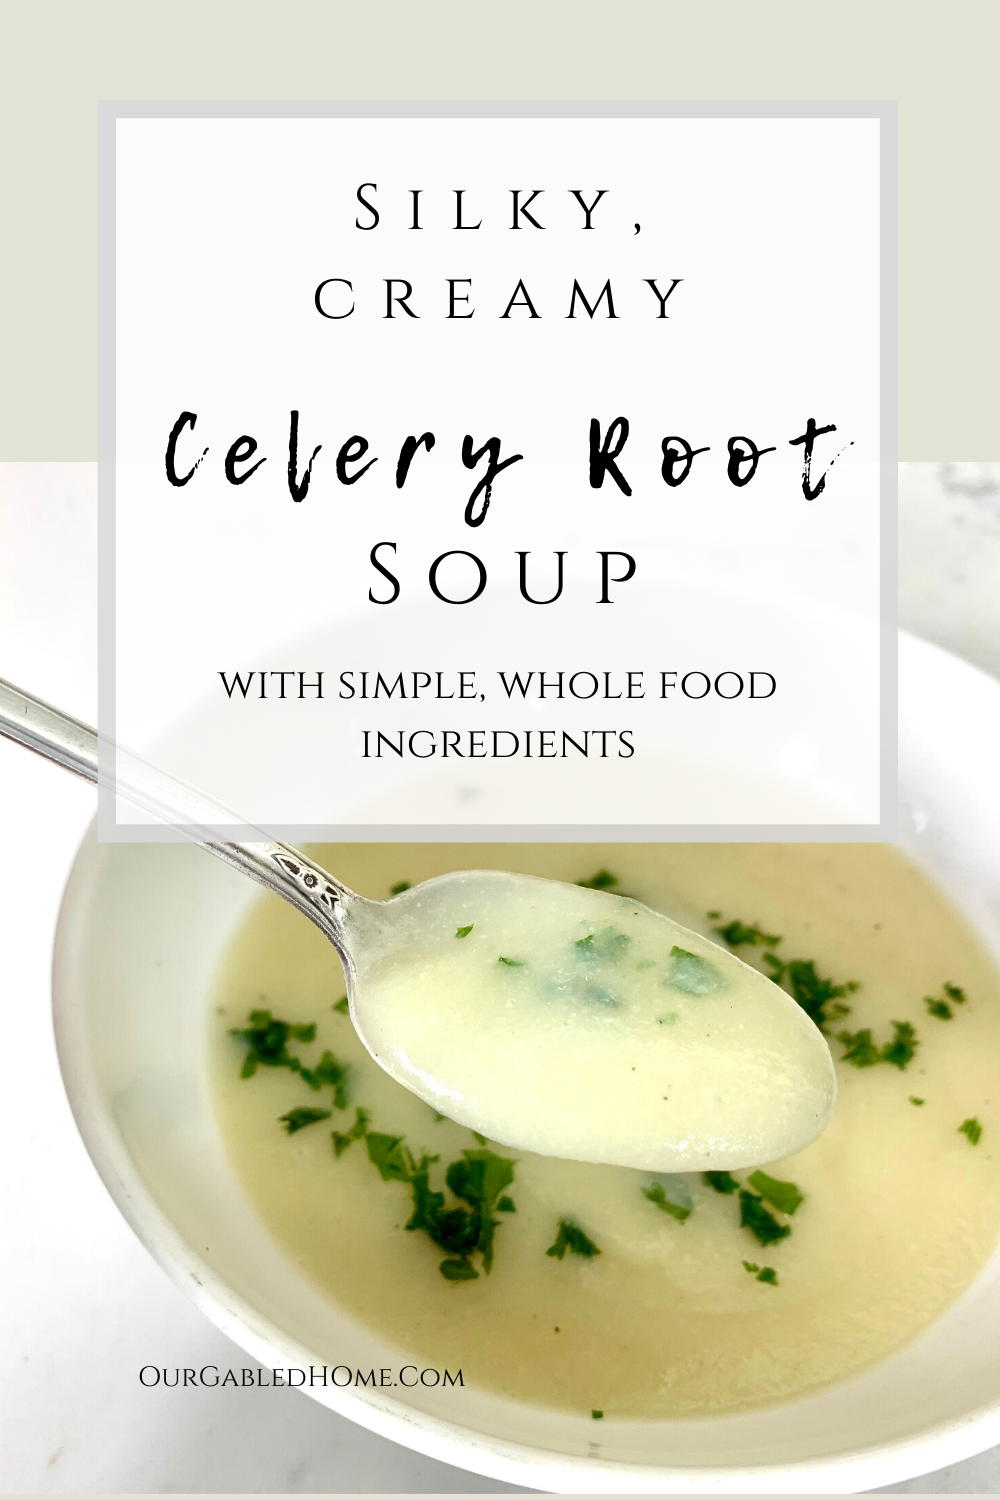 Silky, creamy celery root soup with simple, whole food ingredients